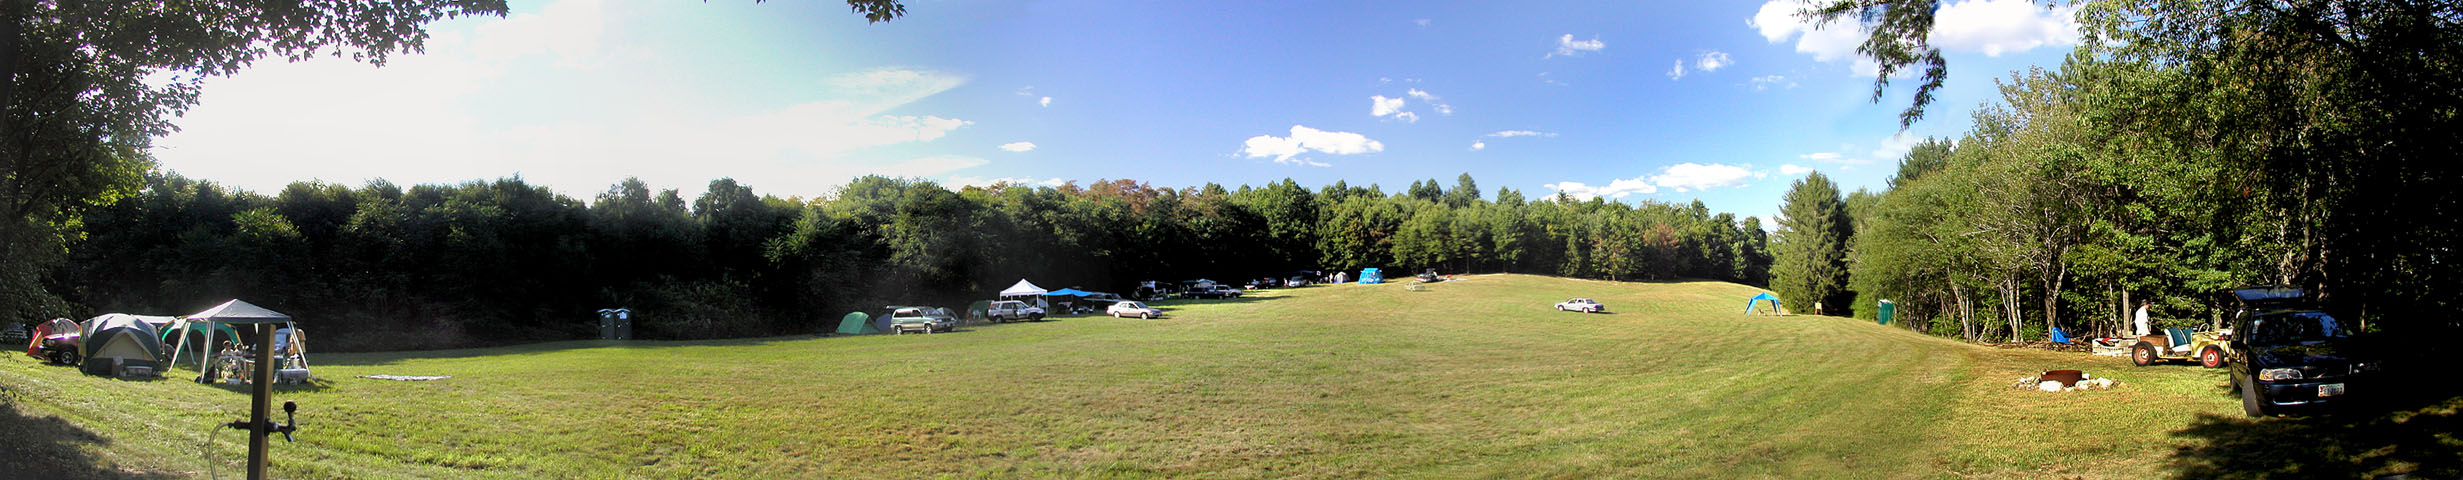 A Panoramic View of the MASHOUT campsite on Popenoes Mountain